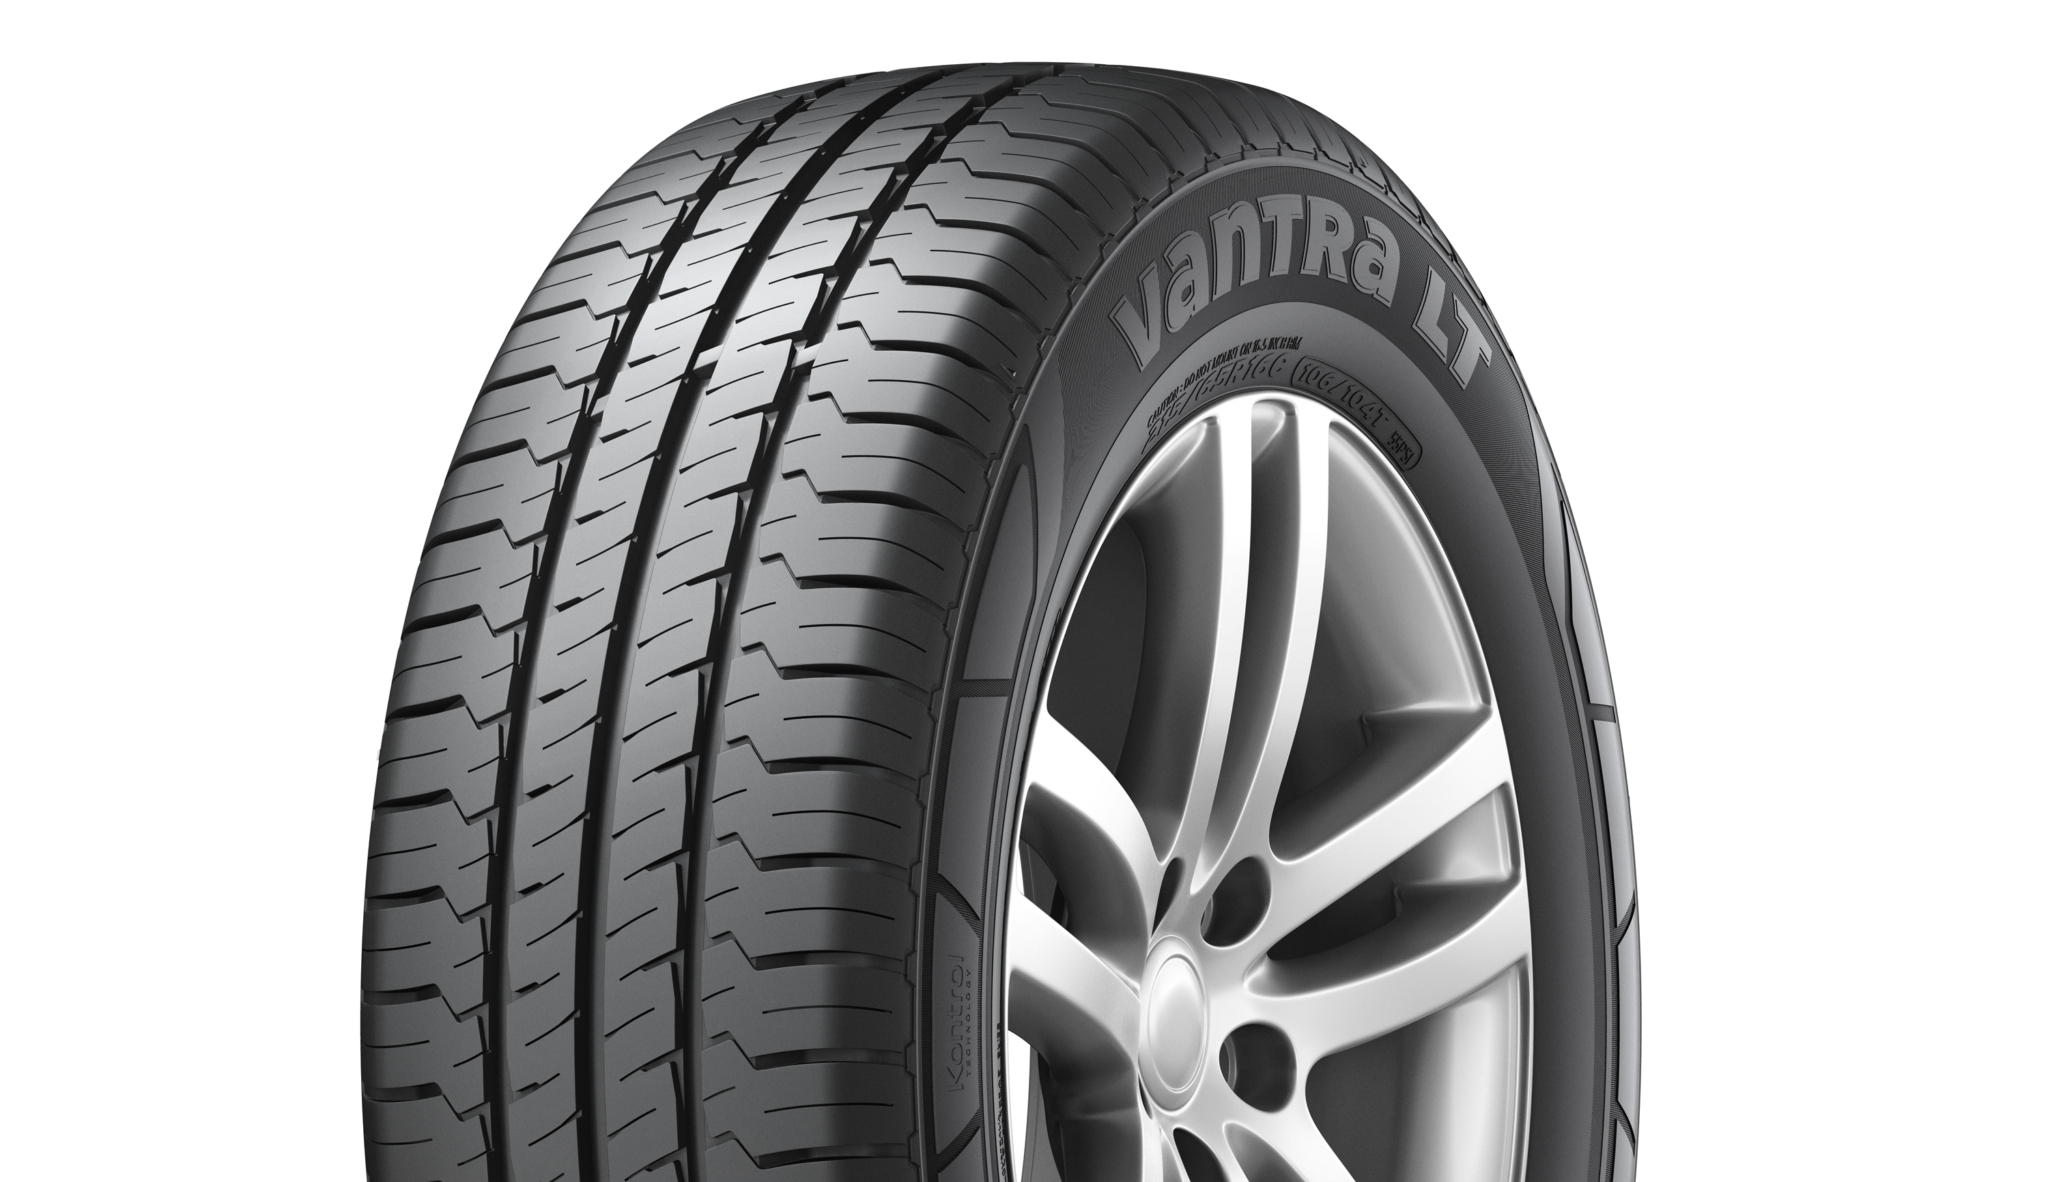 Hankook’s Vantra range offers efficiency, safety and exceptional durability for light commercials